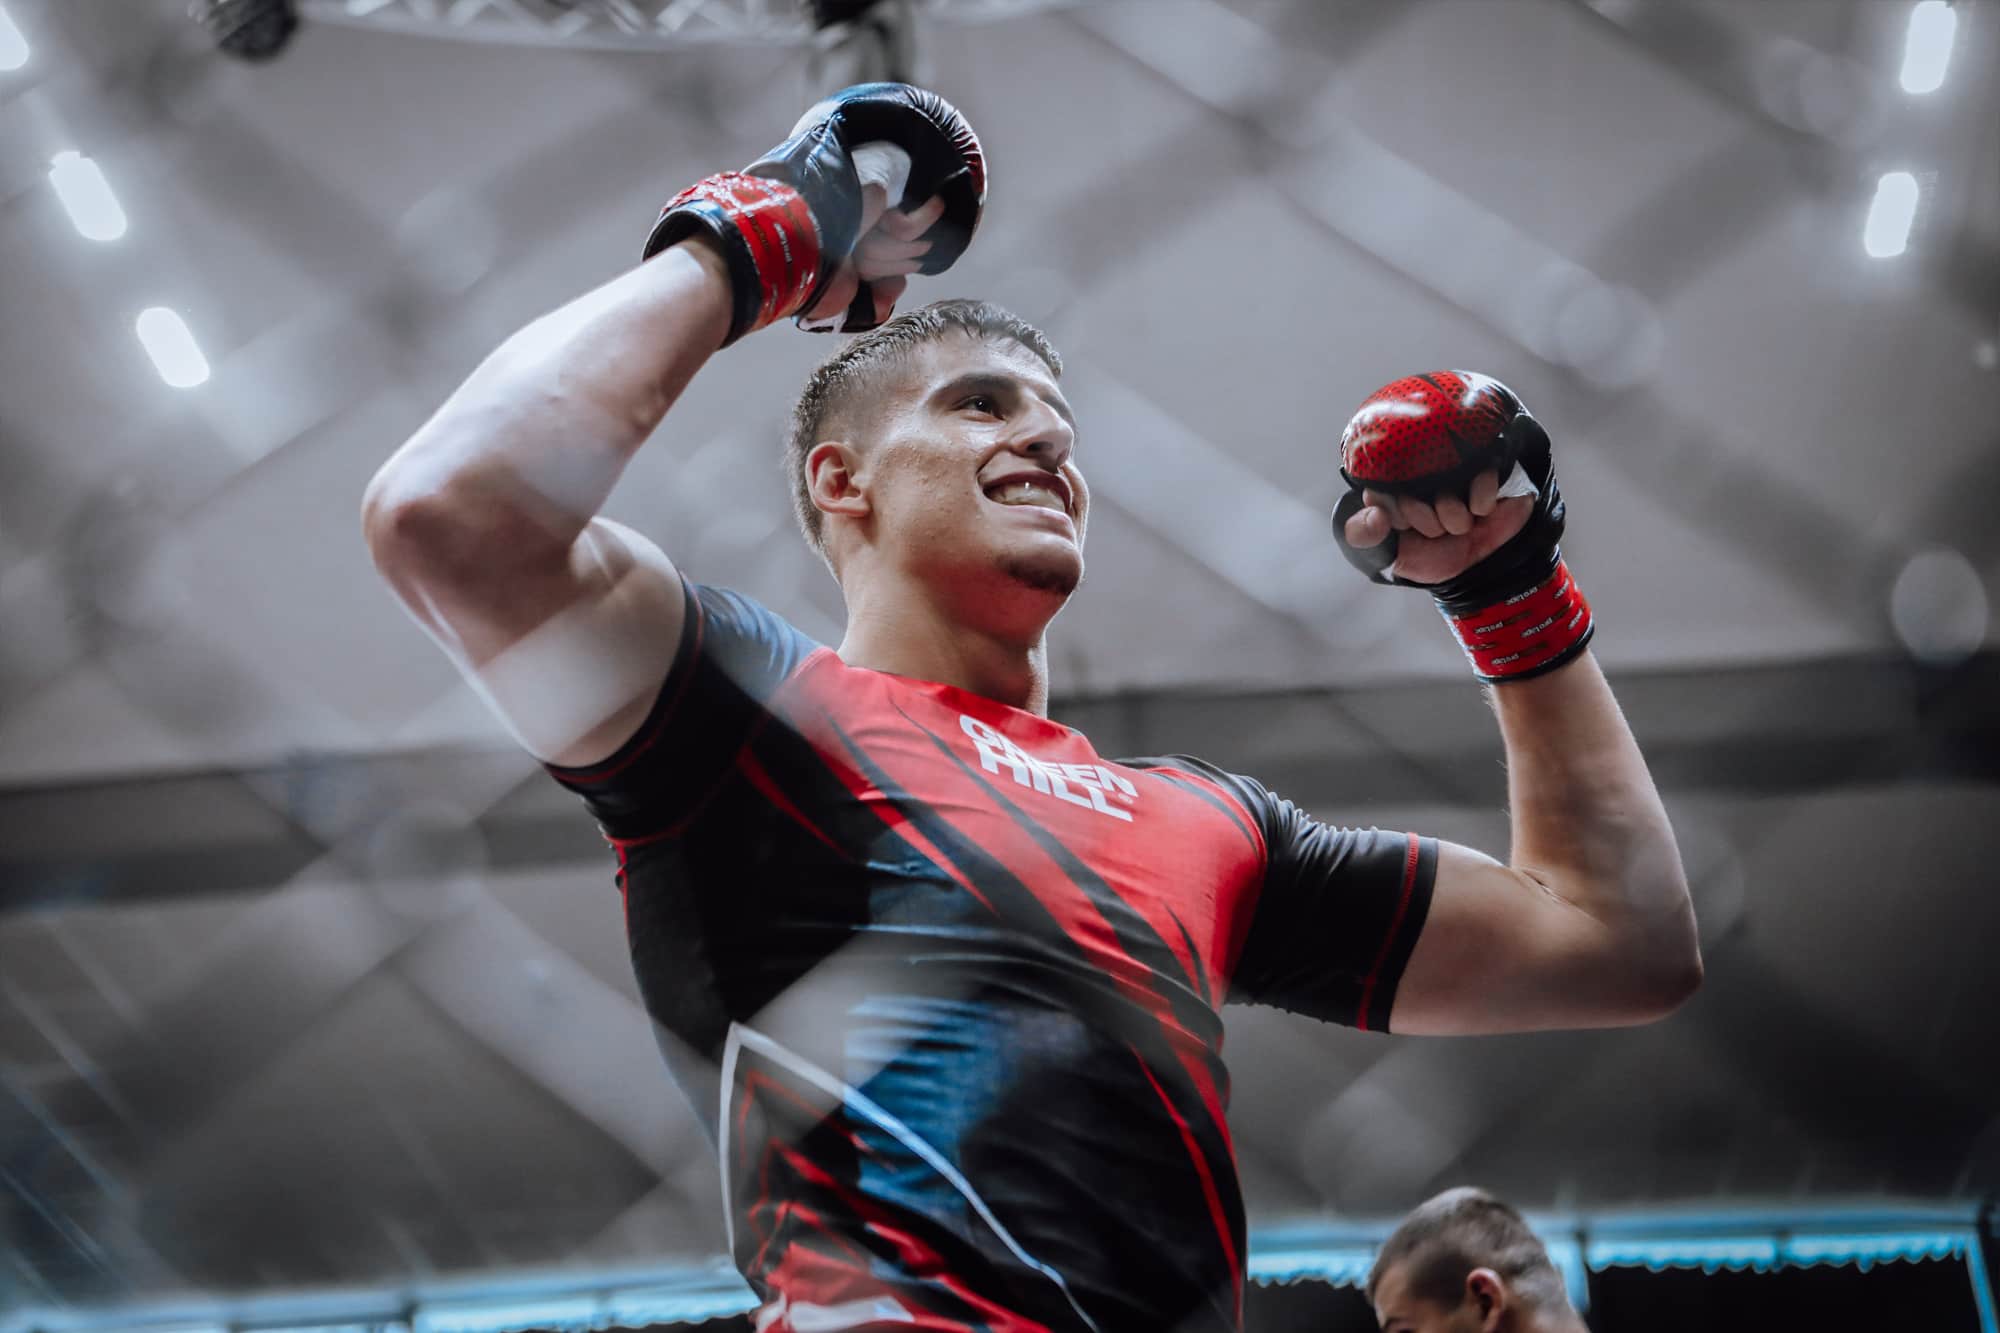 IMMAF standouts Berisha and Bolander announce themselves on UK scene